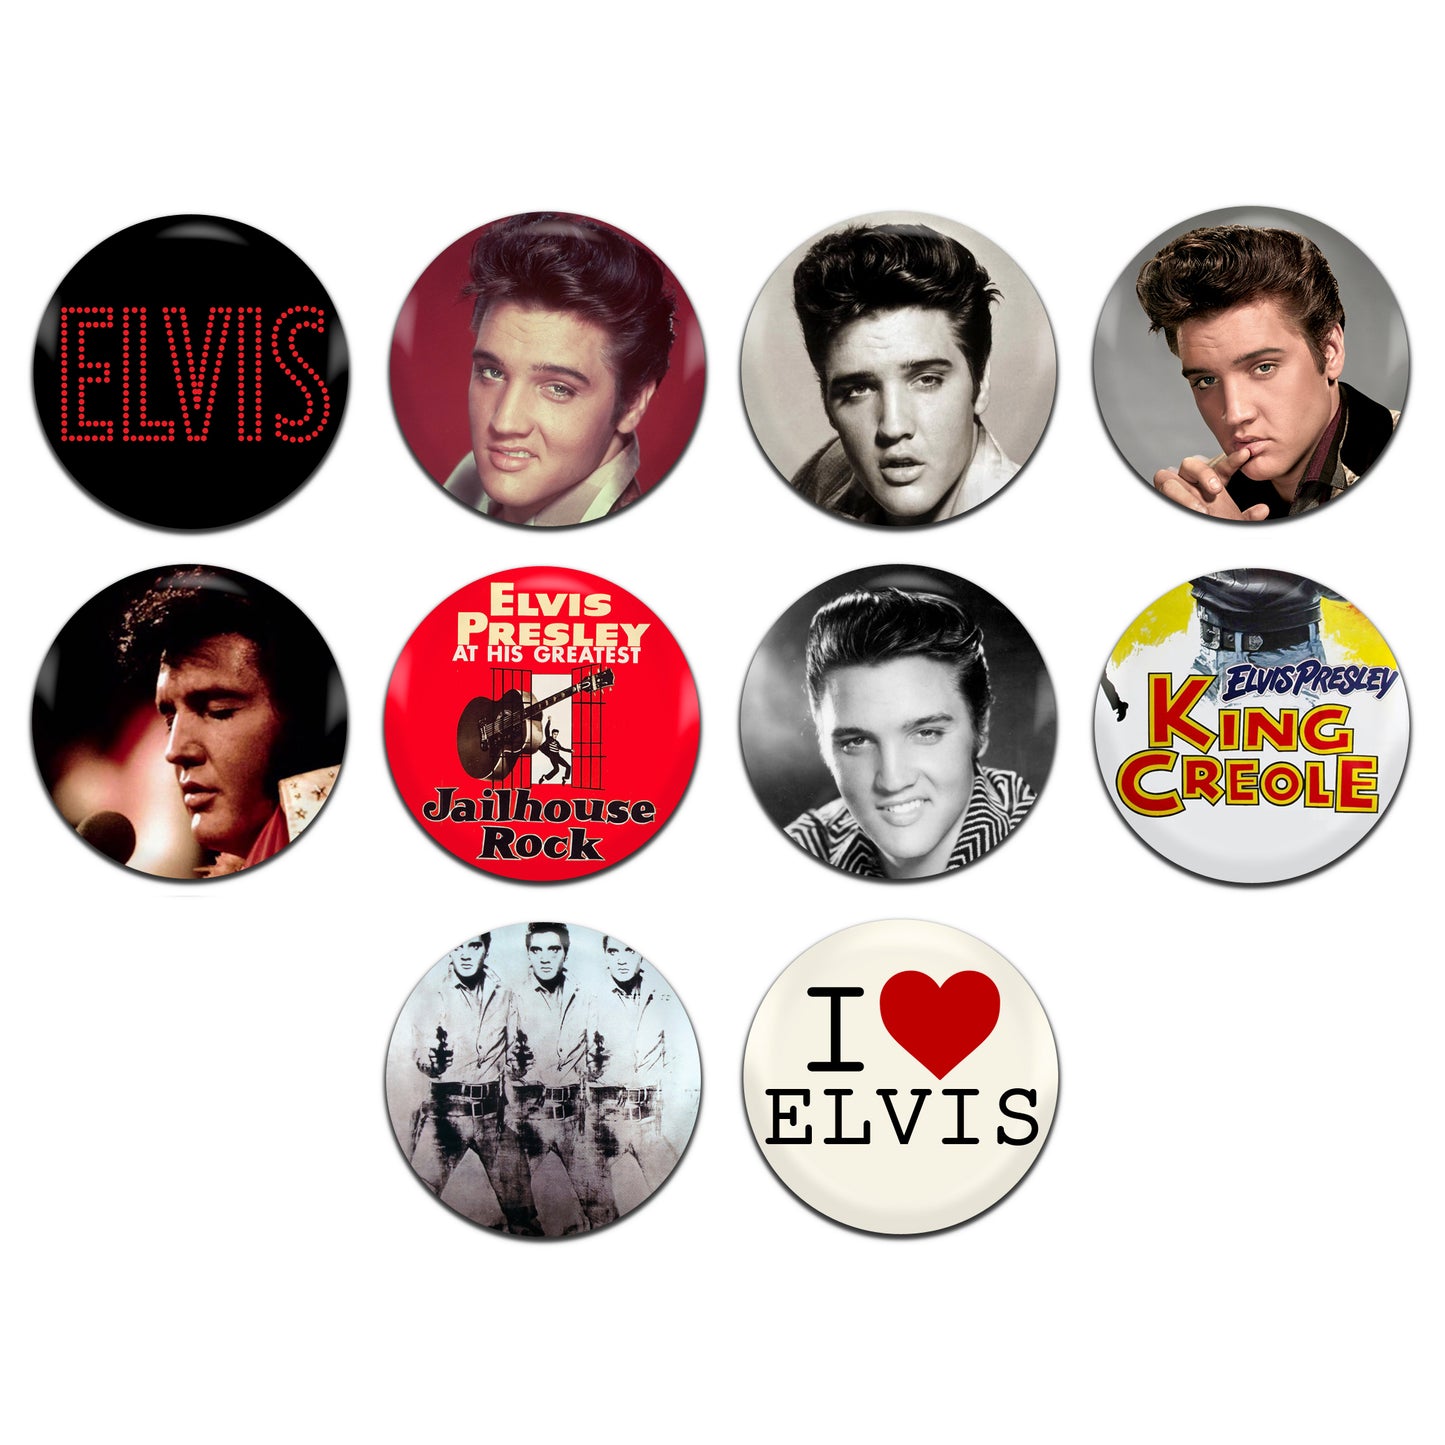 Elvis Presley Rock and Roll Country Singer 50's 60's 25mm / 1 Inch D-Pin Button Badges (10x Set)